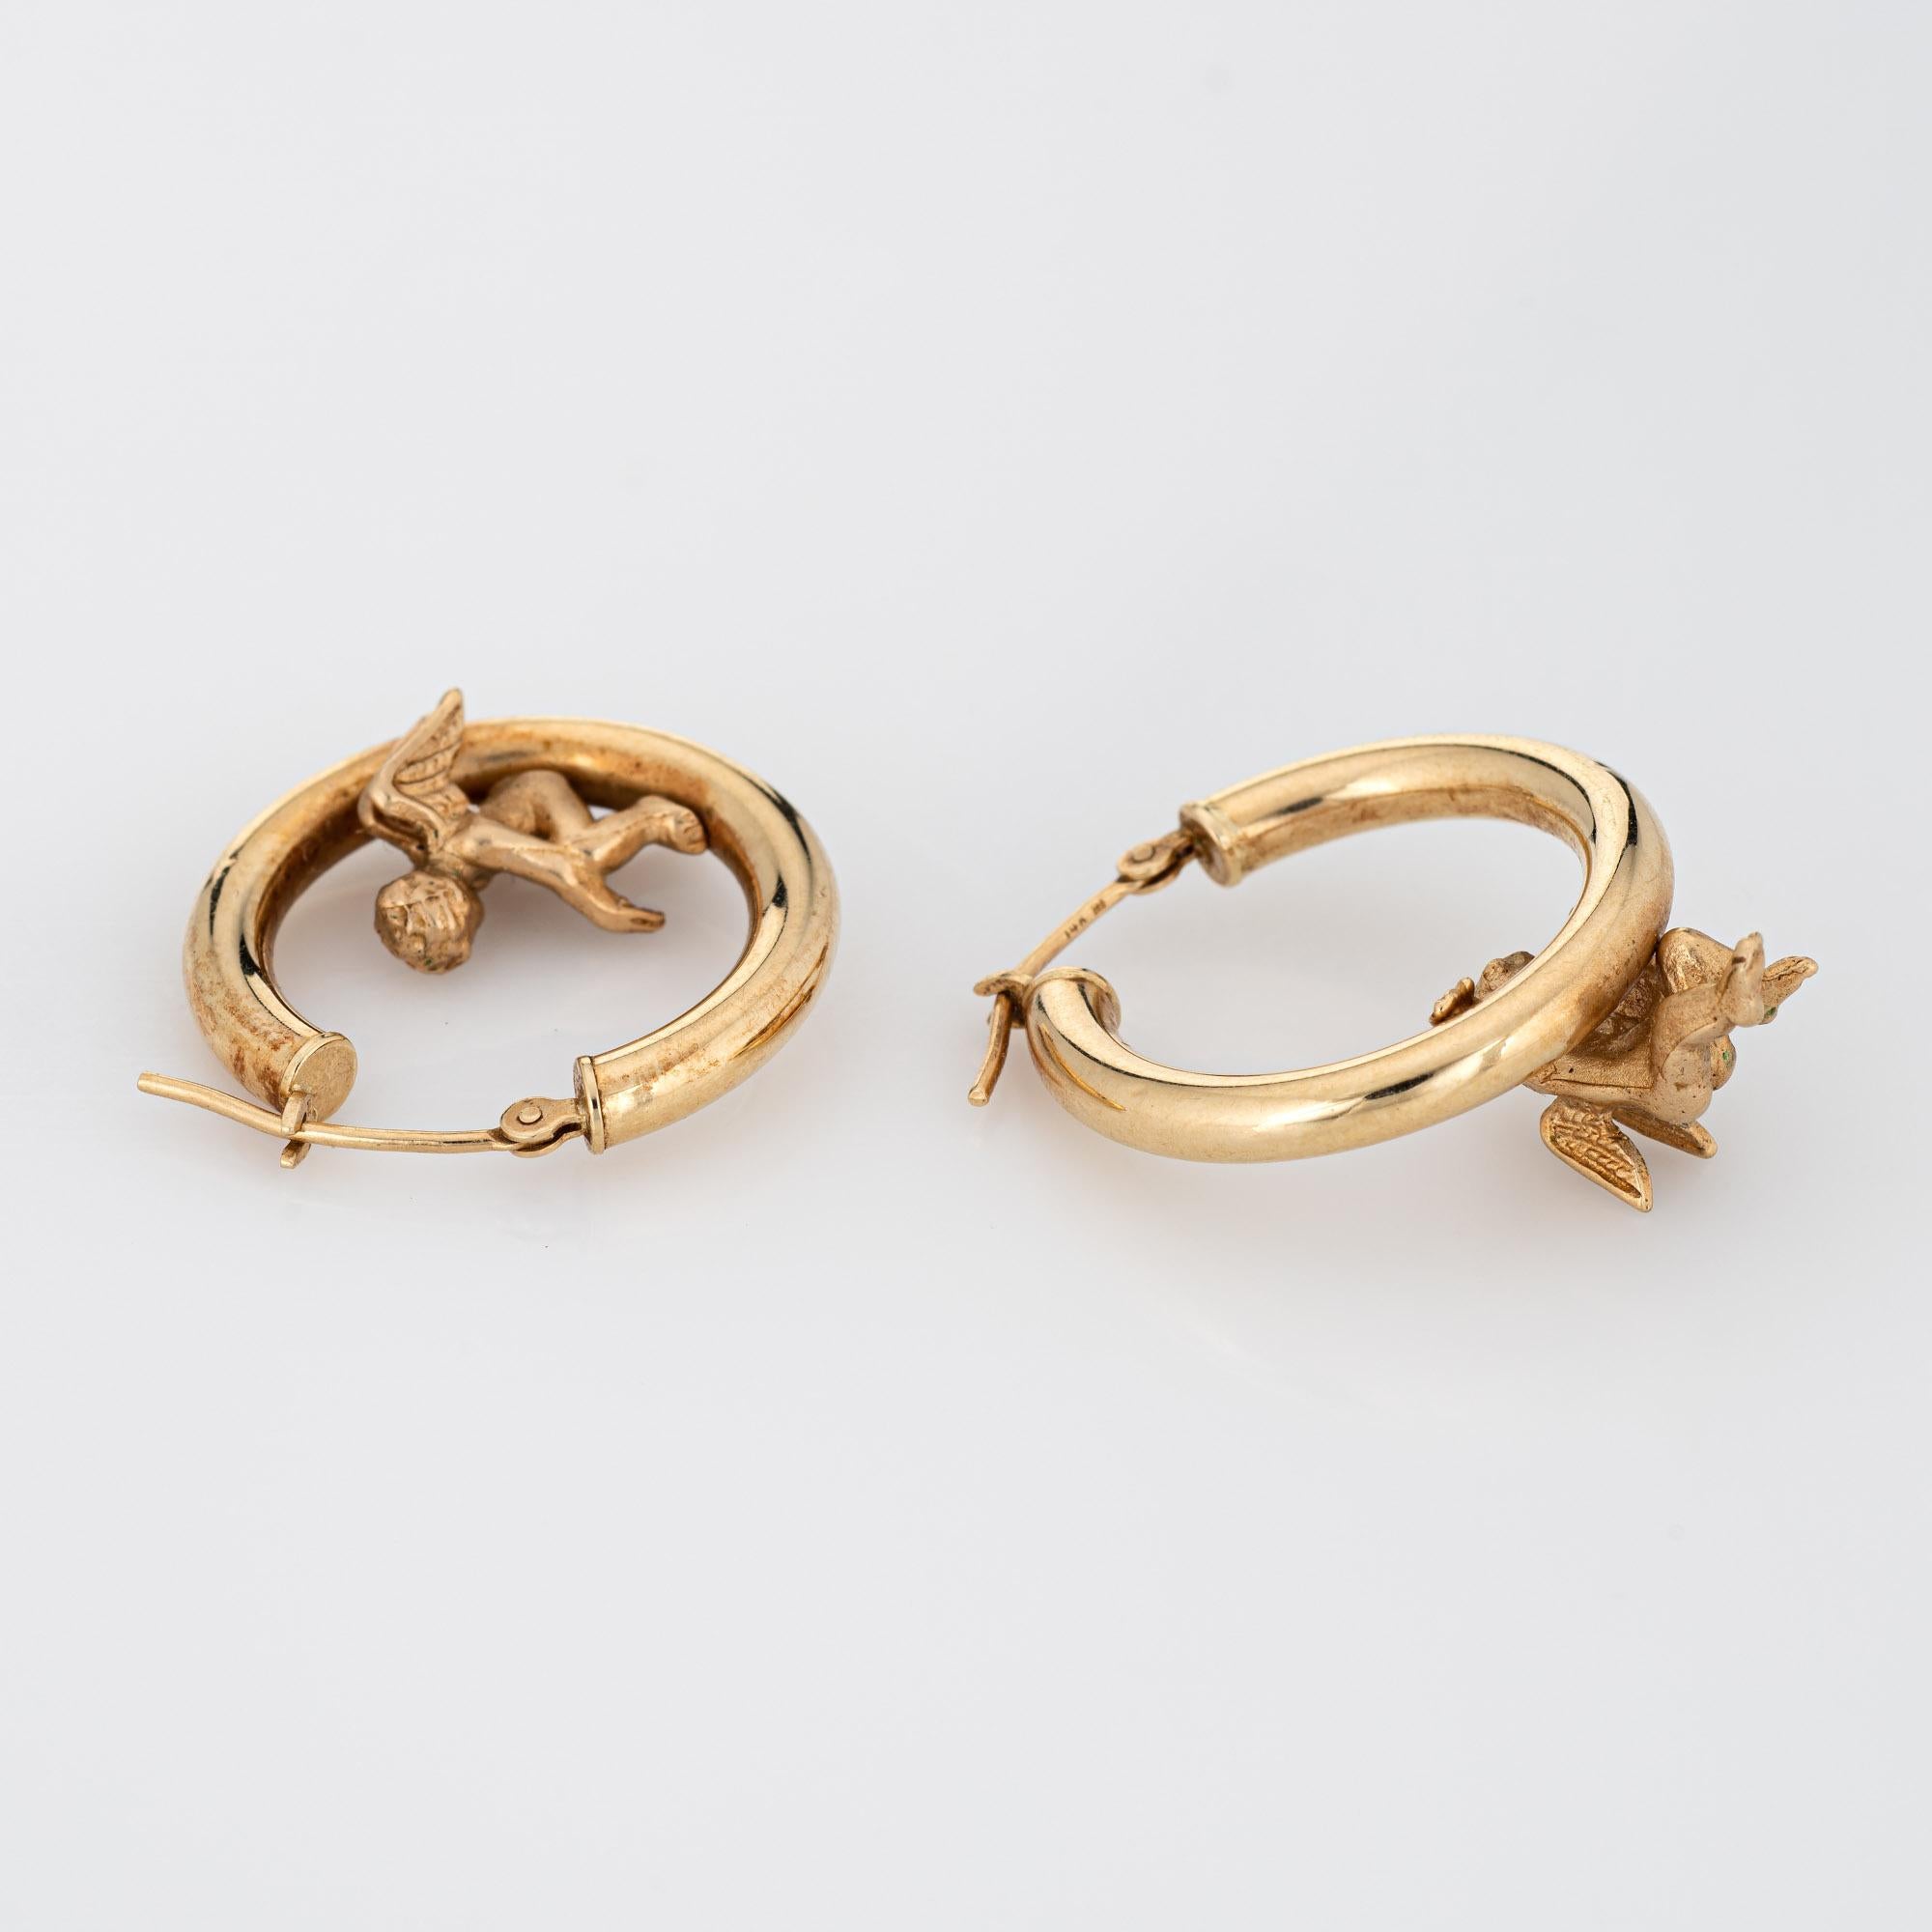 Finely detailed pair of vintage winged angel hoop earrings crafted in 14k yellow gold (circa 1990s). 

The charming earrings highlight two winged angels, one sitting within the hoop with the other climbing up to the hoop. The hollow earrings offer a